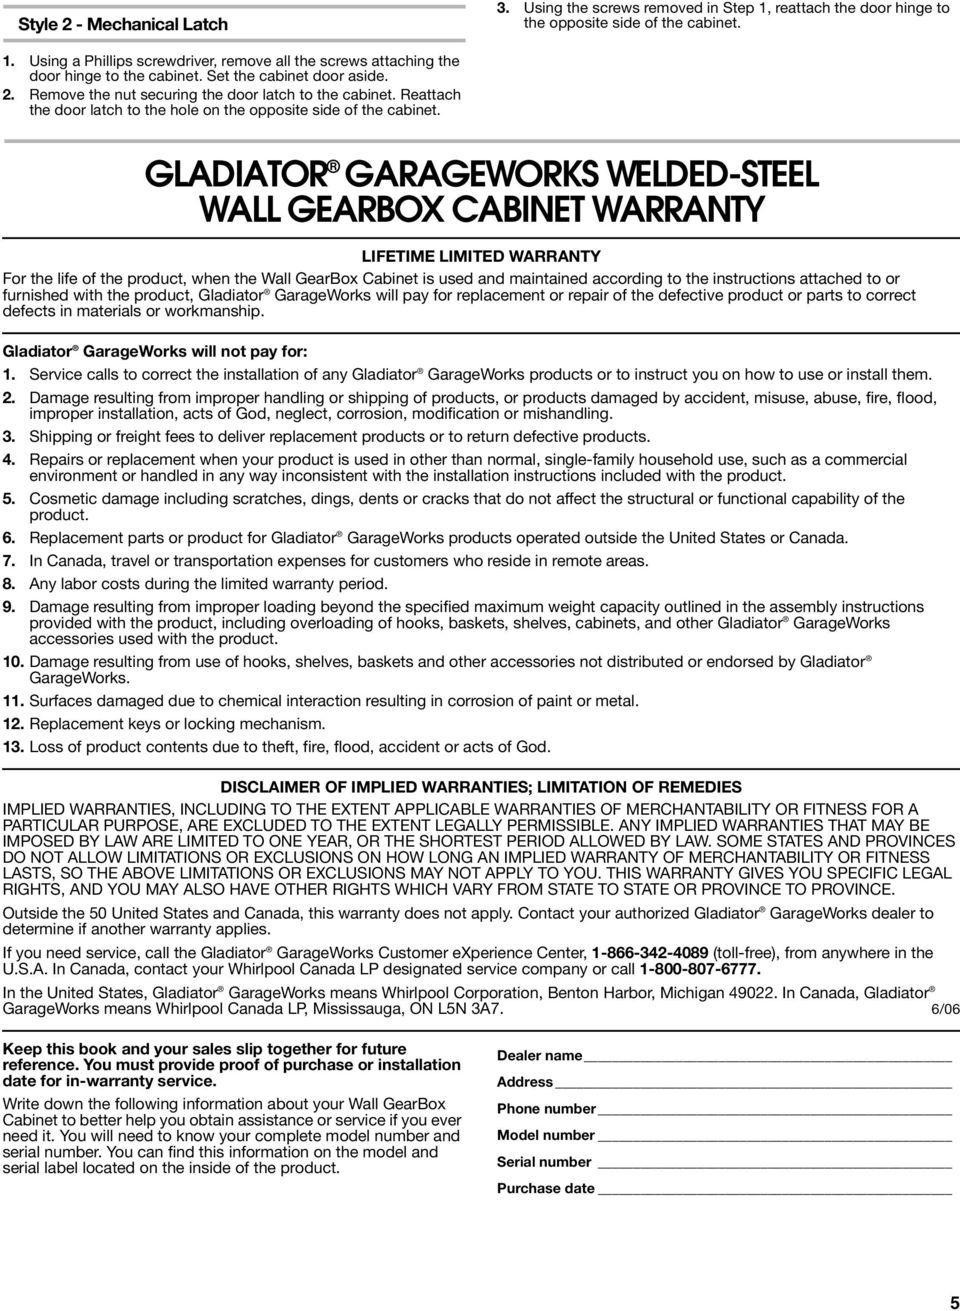 GLDITOR GRGEWORKS WELDED-STEEL WLL GEROX CINET WRRNTY LIFETIME LIMITED WRRNTY For the life of the product, when the Wall Gearox Cabinet is used and maintained according to the instructions attached